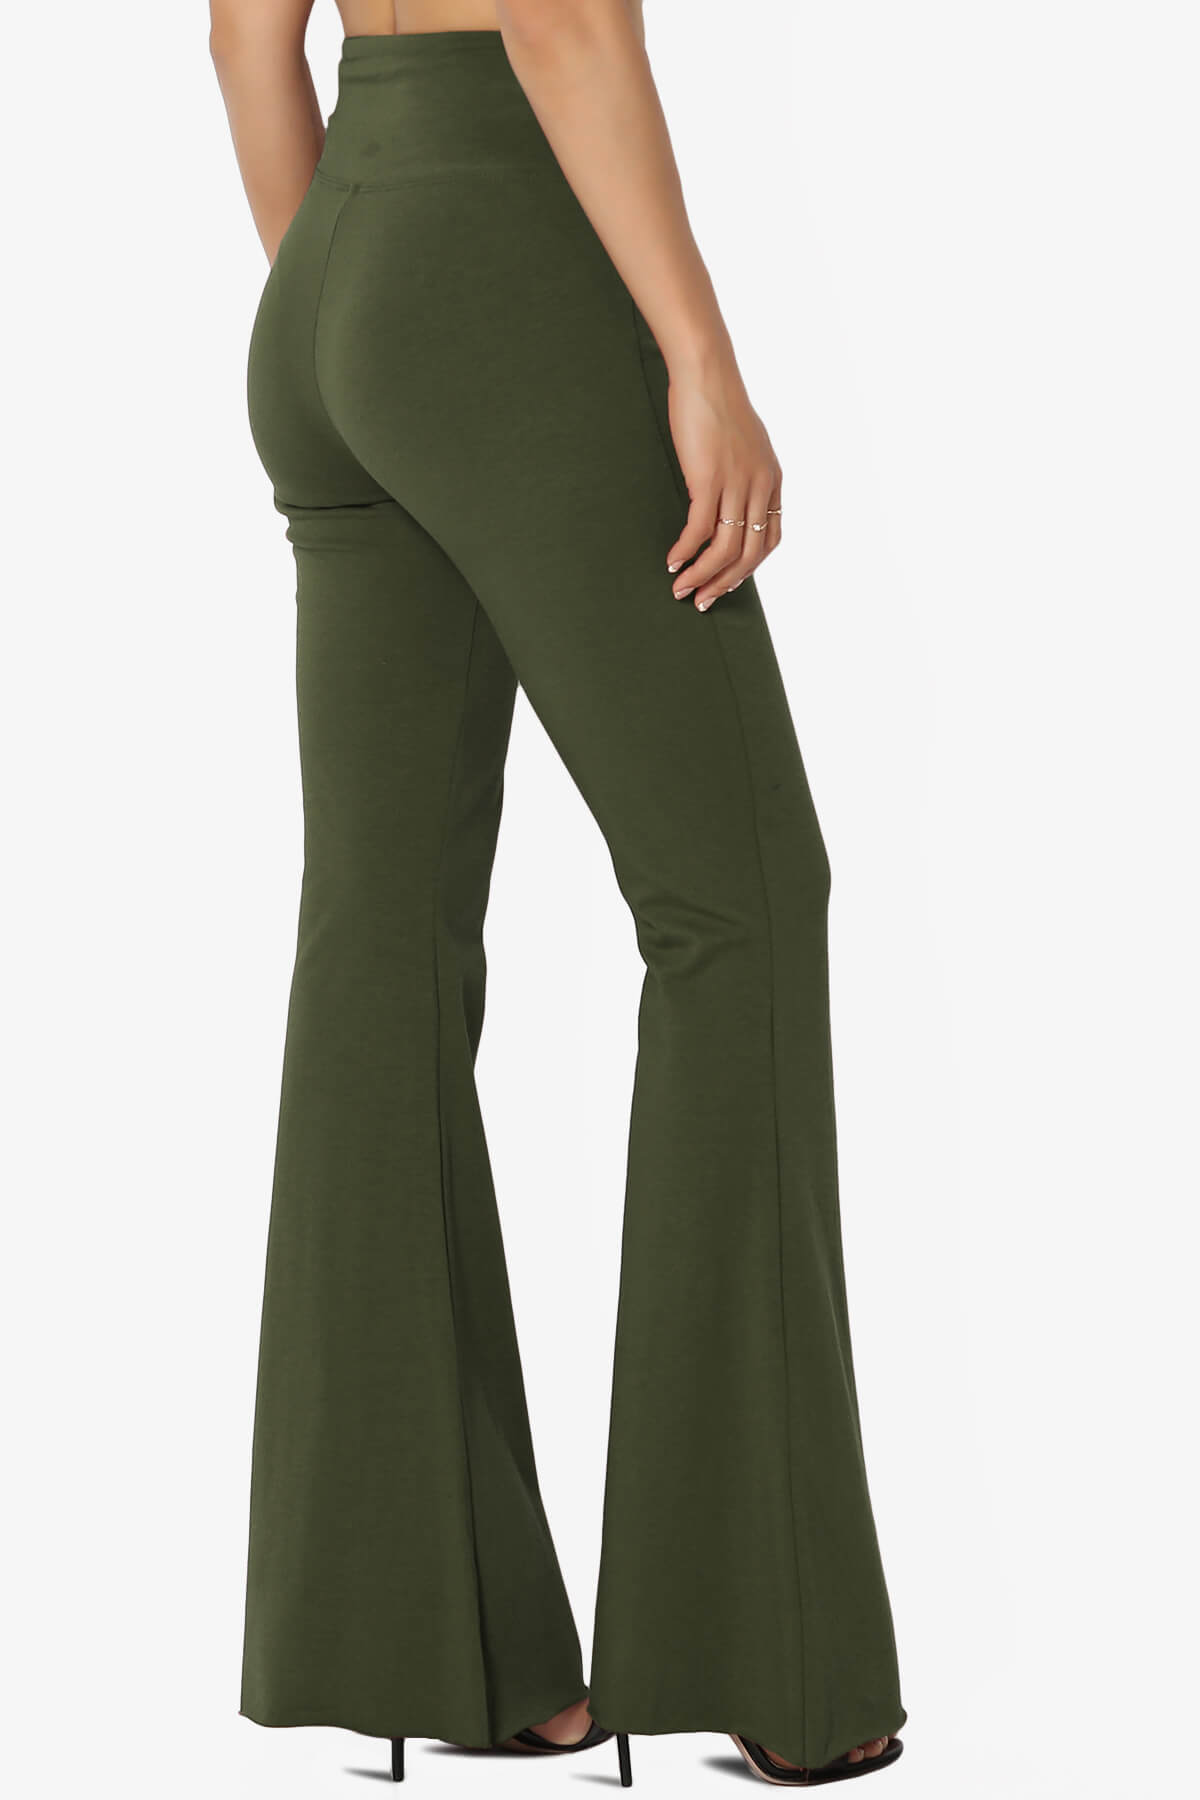 Load image into Gallery viewer, Zaylee Raw Hem Flared Comfy Yoga Pants OLIVE_4
